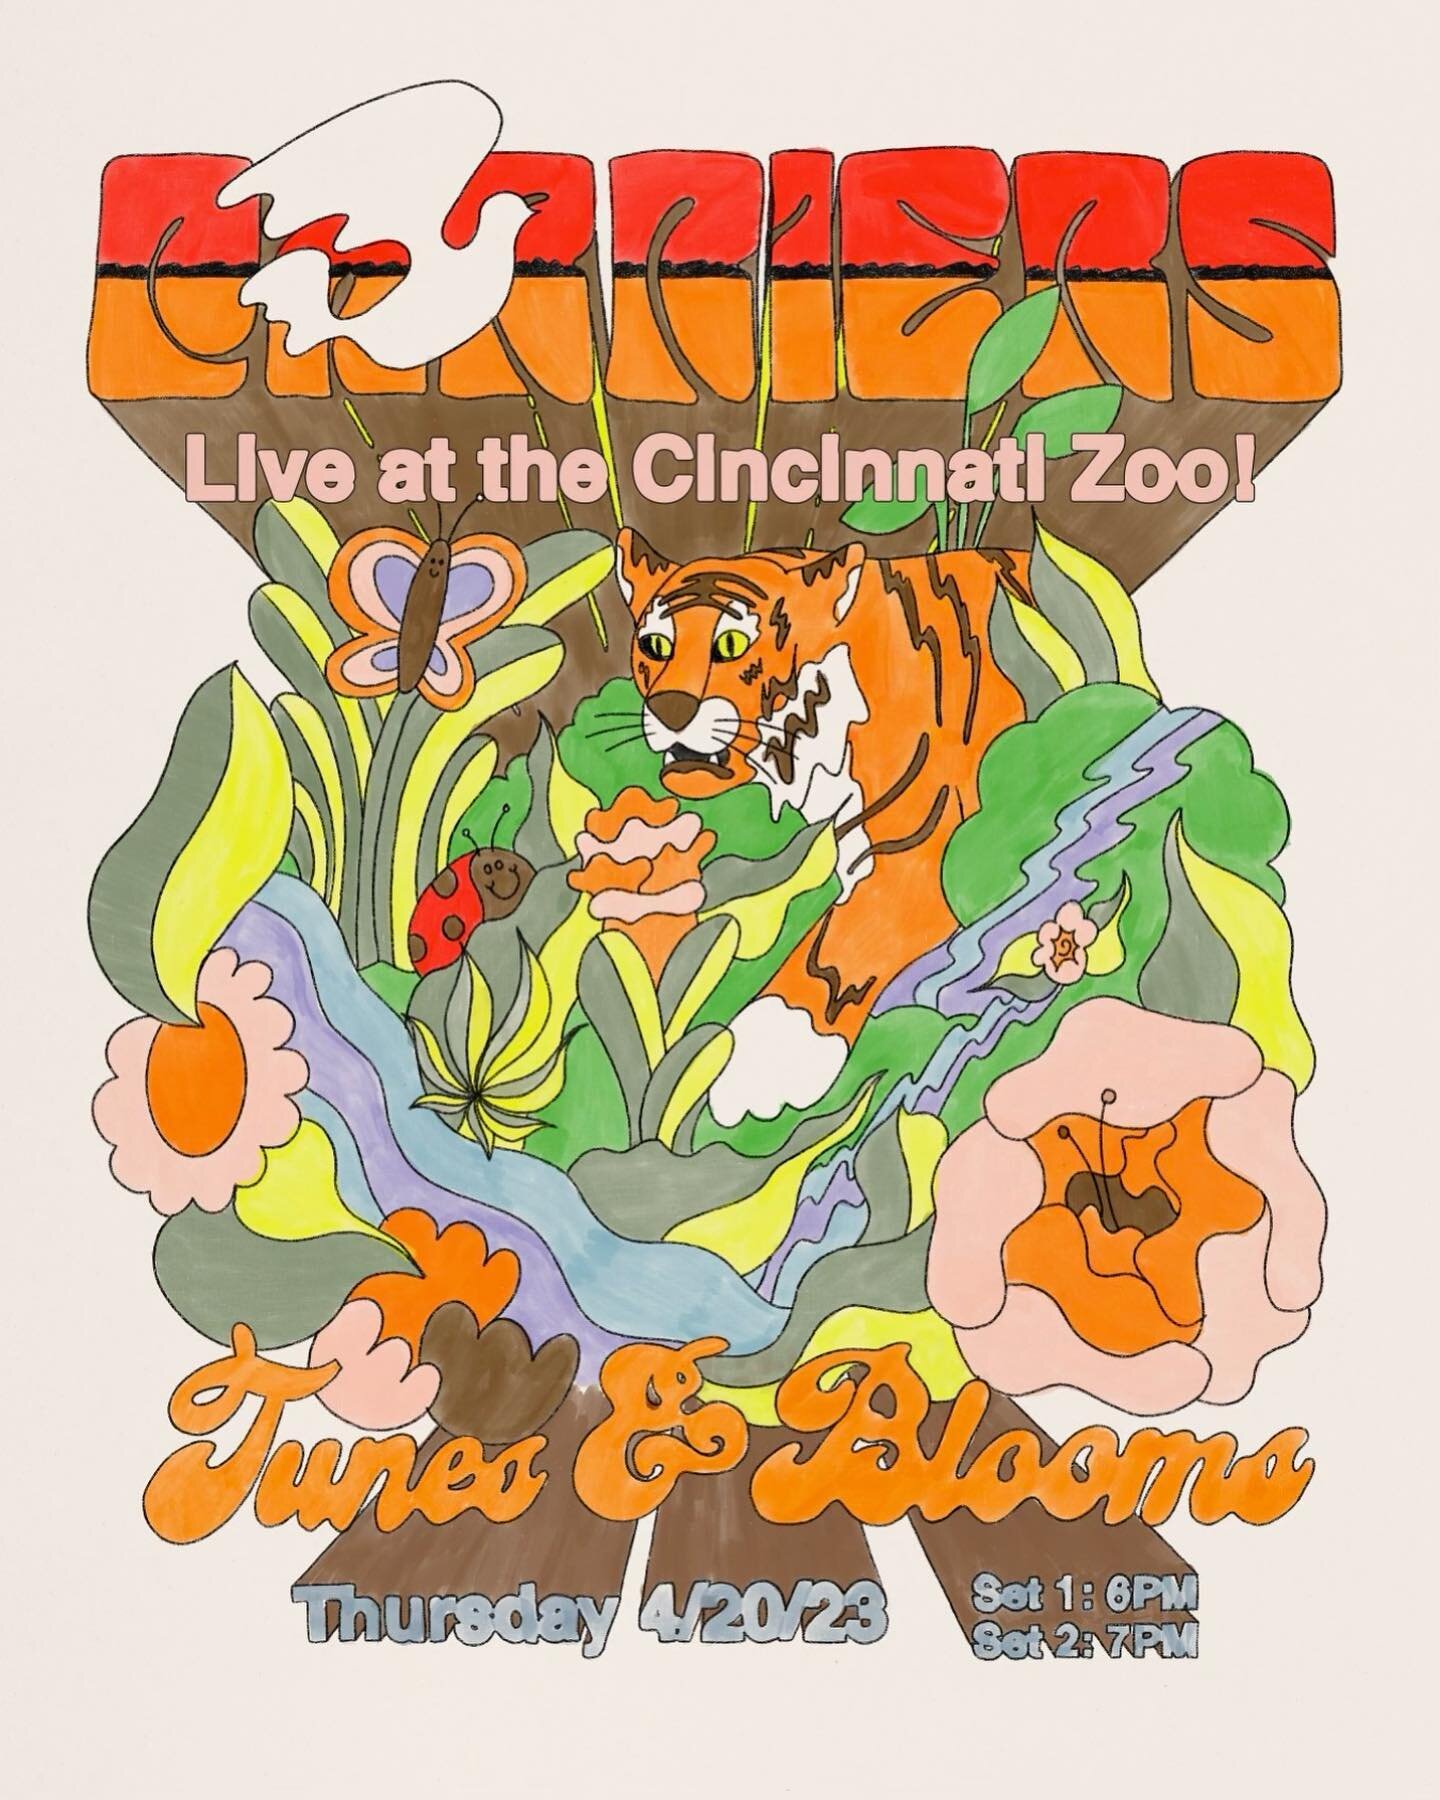 Cincinnati! We&rsquo;re playing at the Zoo next Thursday night 4/20 for Tunes n Blooms! would love to see ya there!

Also, it&rsquo;s free &amp; we&rsquo;re playing 2 sets! 
6pm &amp; 7pm 🐅💚

Thanks to my dude @wolf.bomb for this amazing poster! We